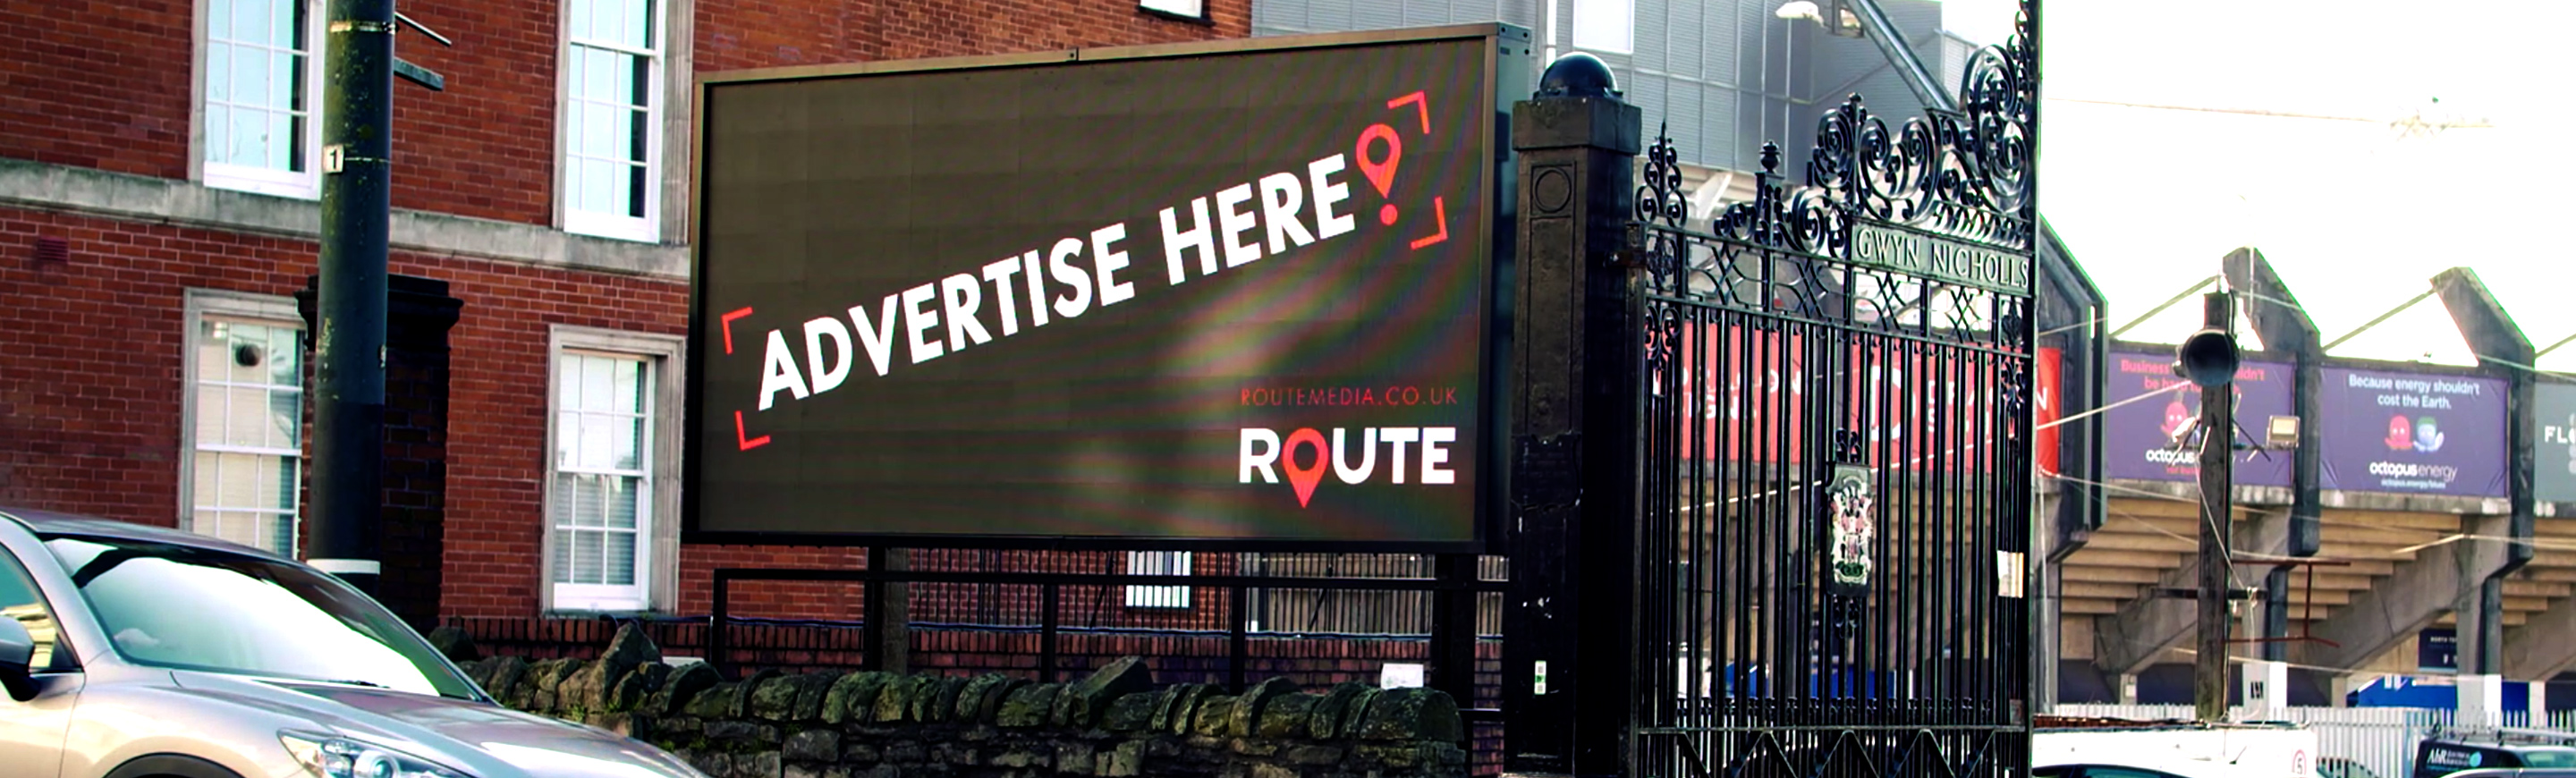 what are the different types of outdoor advertising?